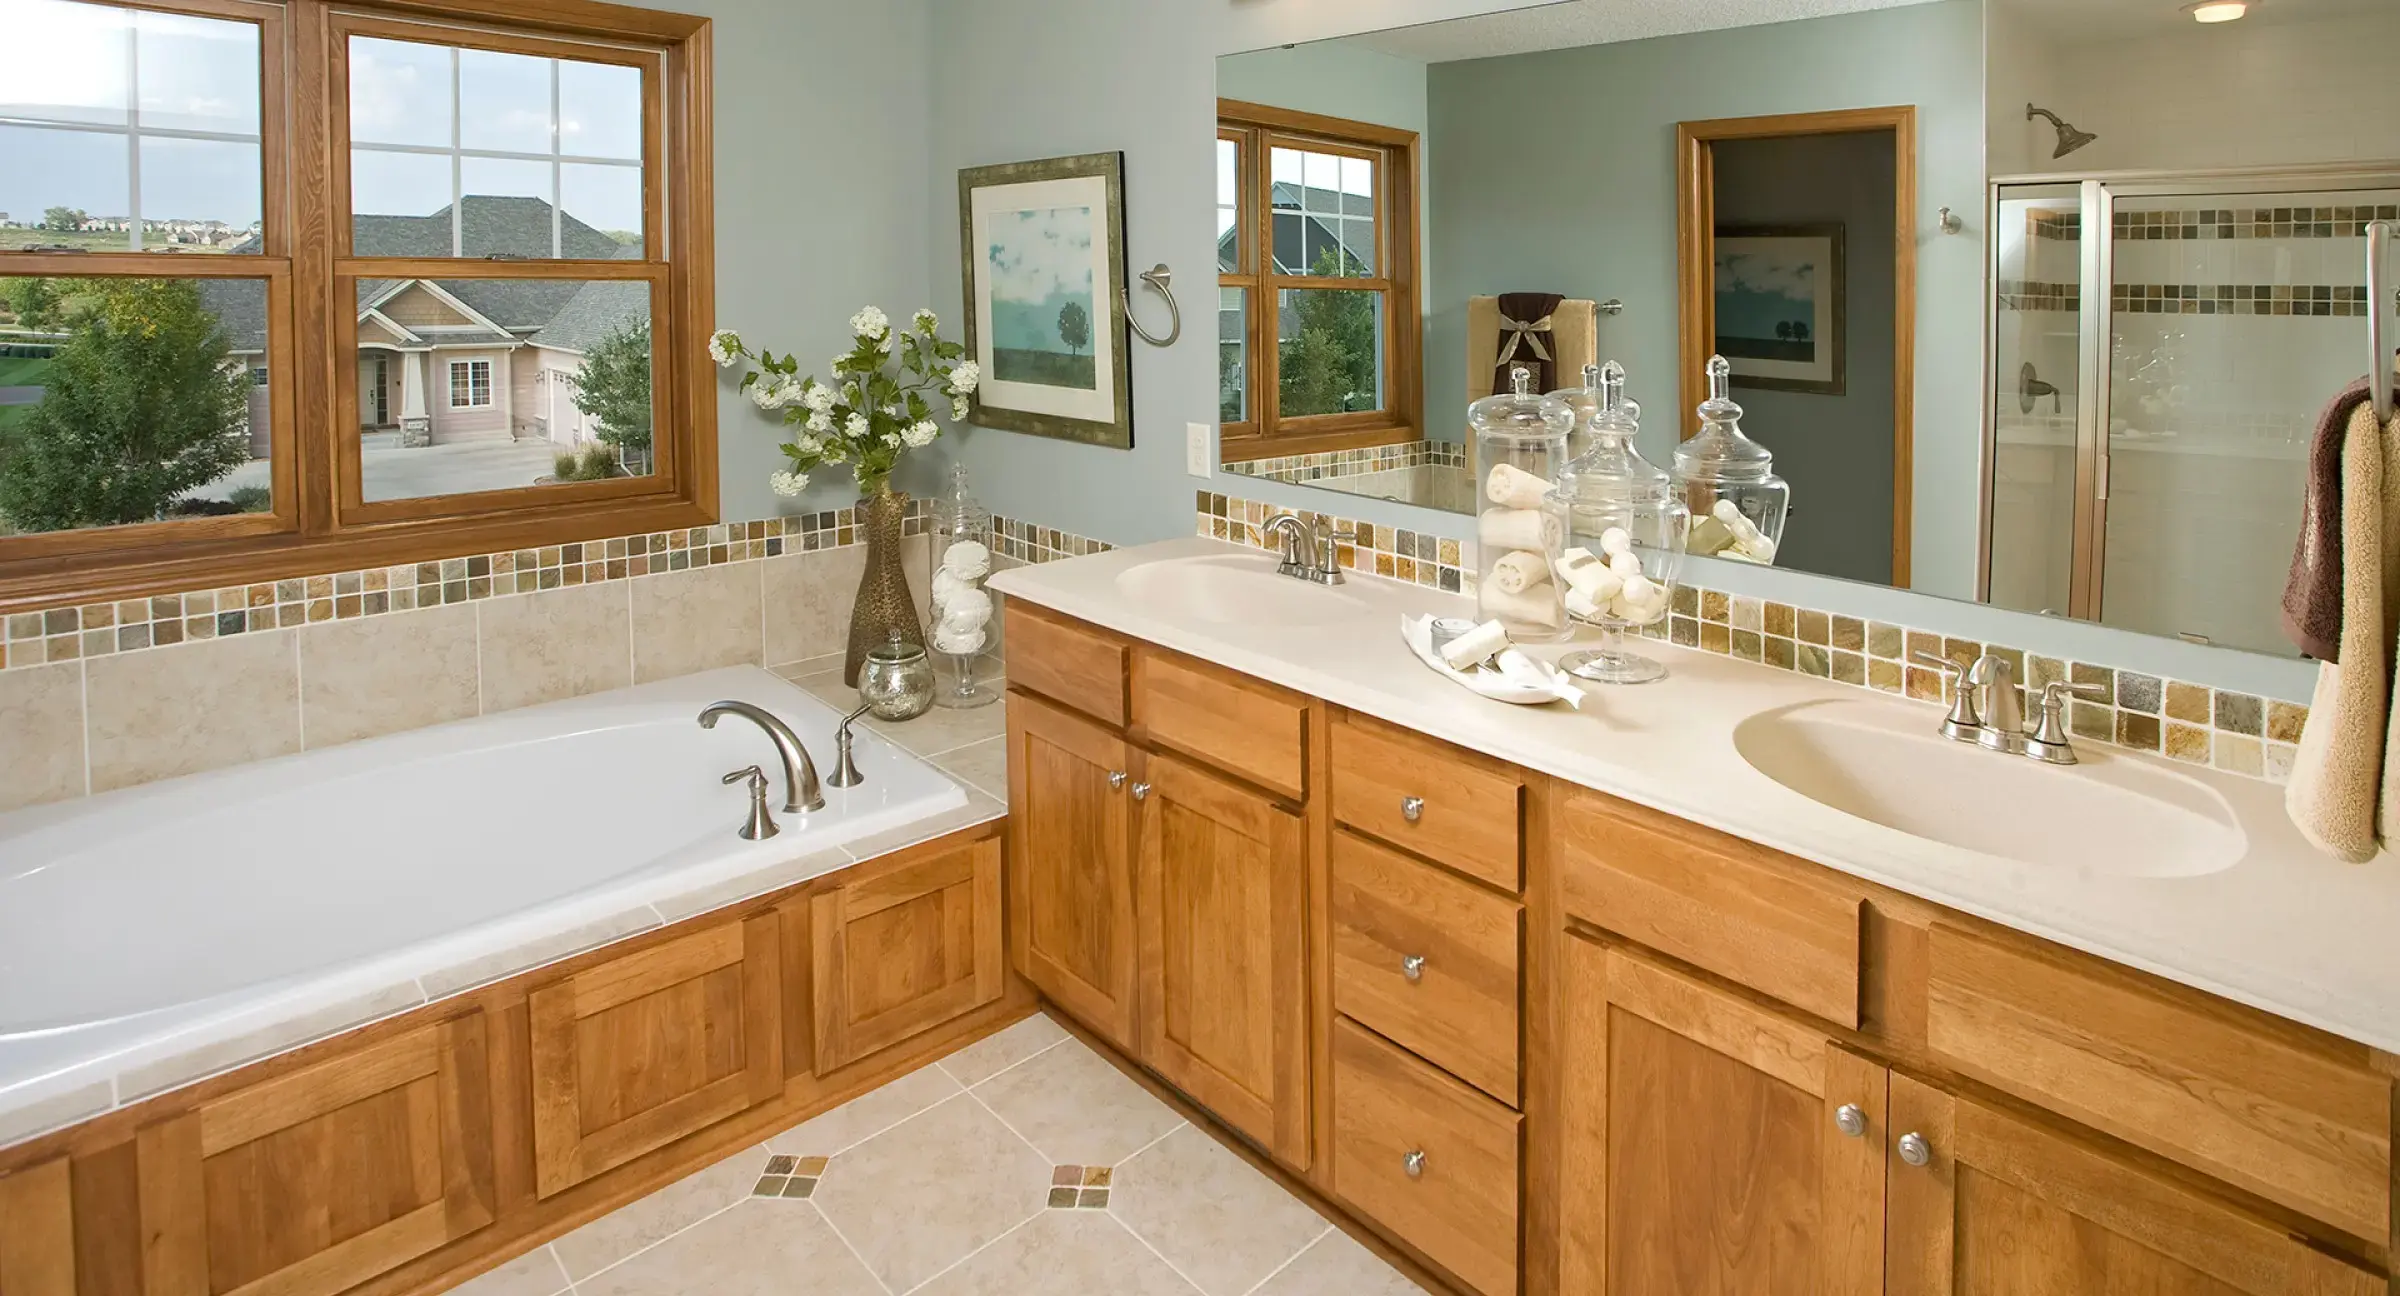 7 Factors to Consider When Ordering Custom Cabinets